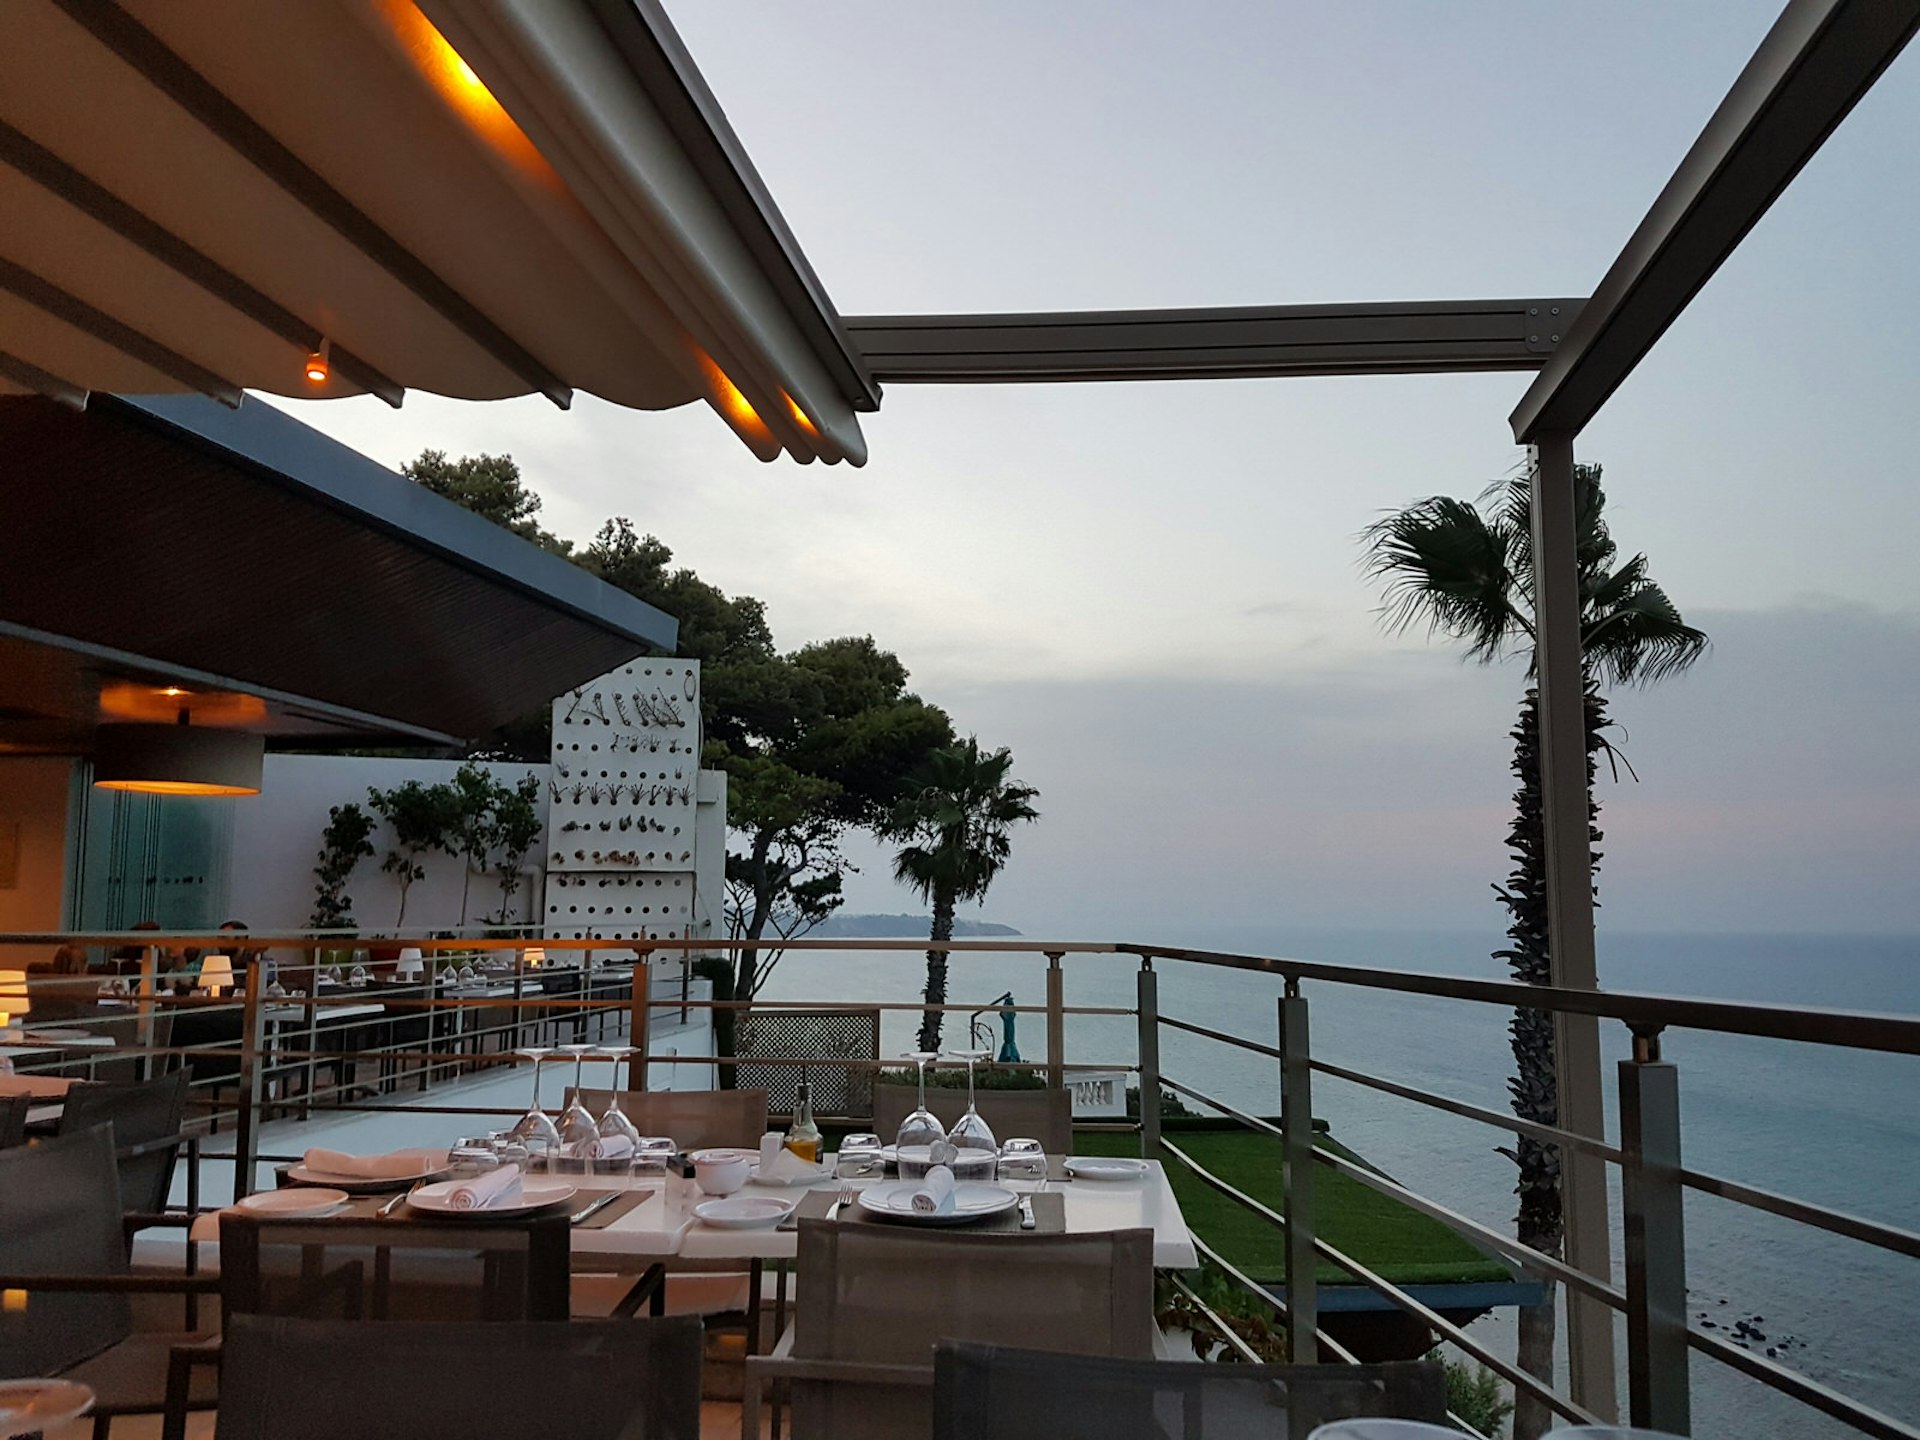 the terrace at The Cliff overlooking the ocean